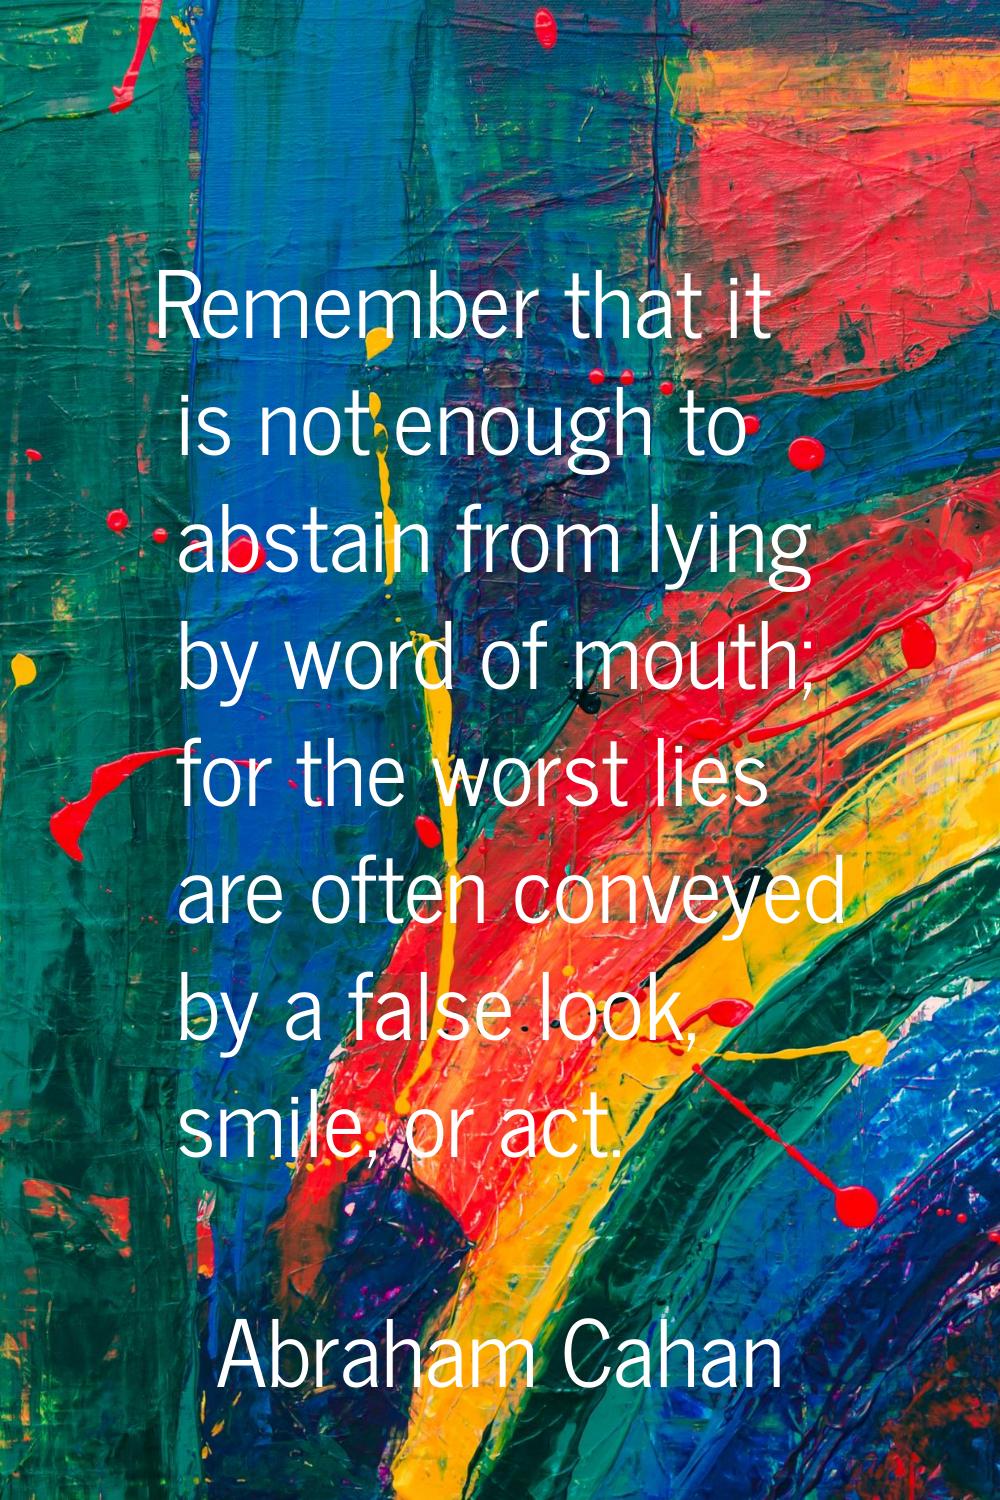 Remember that it is not enough to abstain from lying by word of mouth; for the worst lies are often